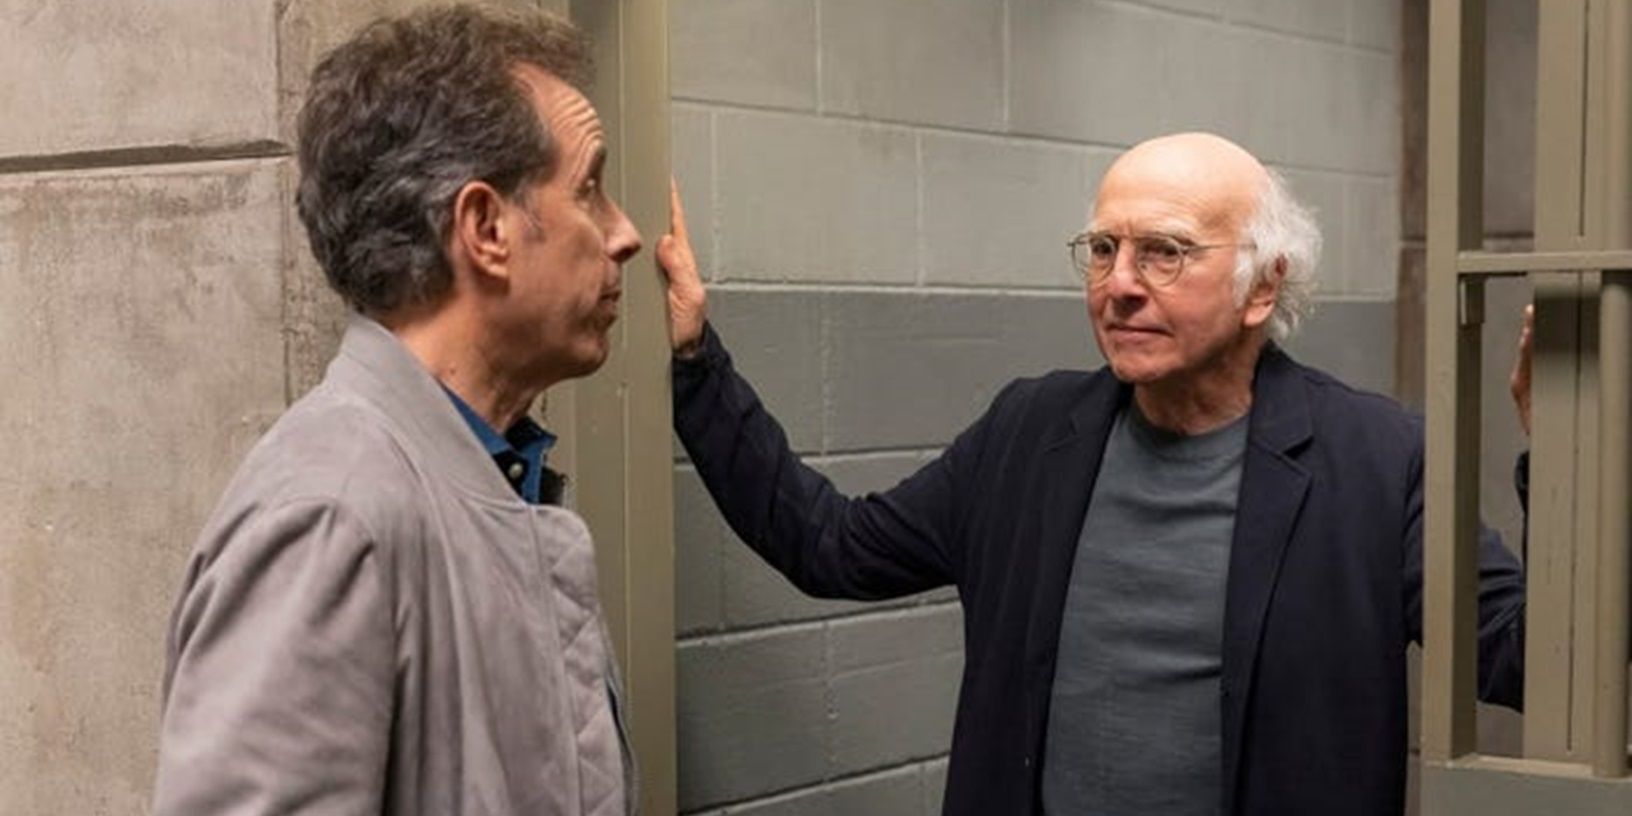 Larry and Jerry in a jailhouse in Curb Your Enthusiasm